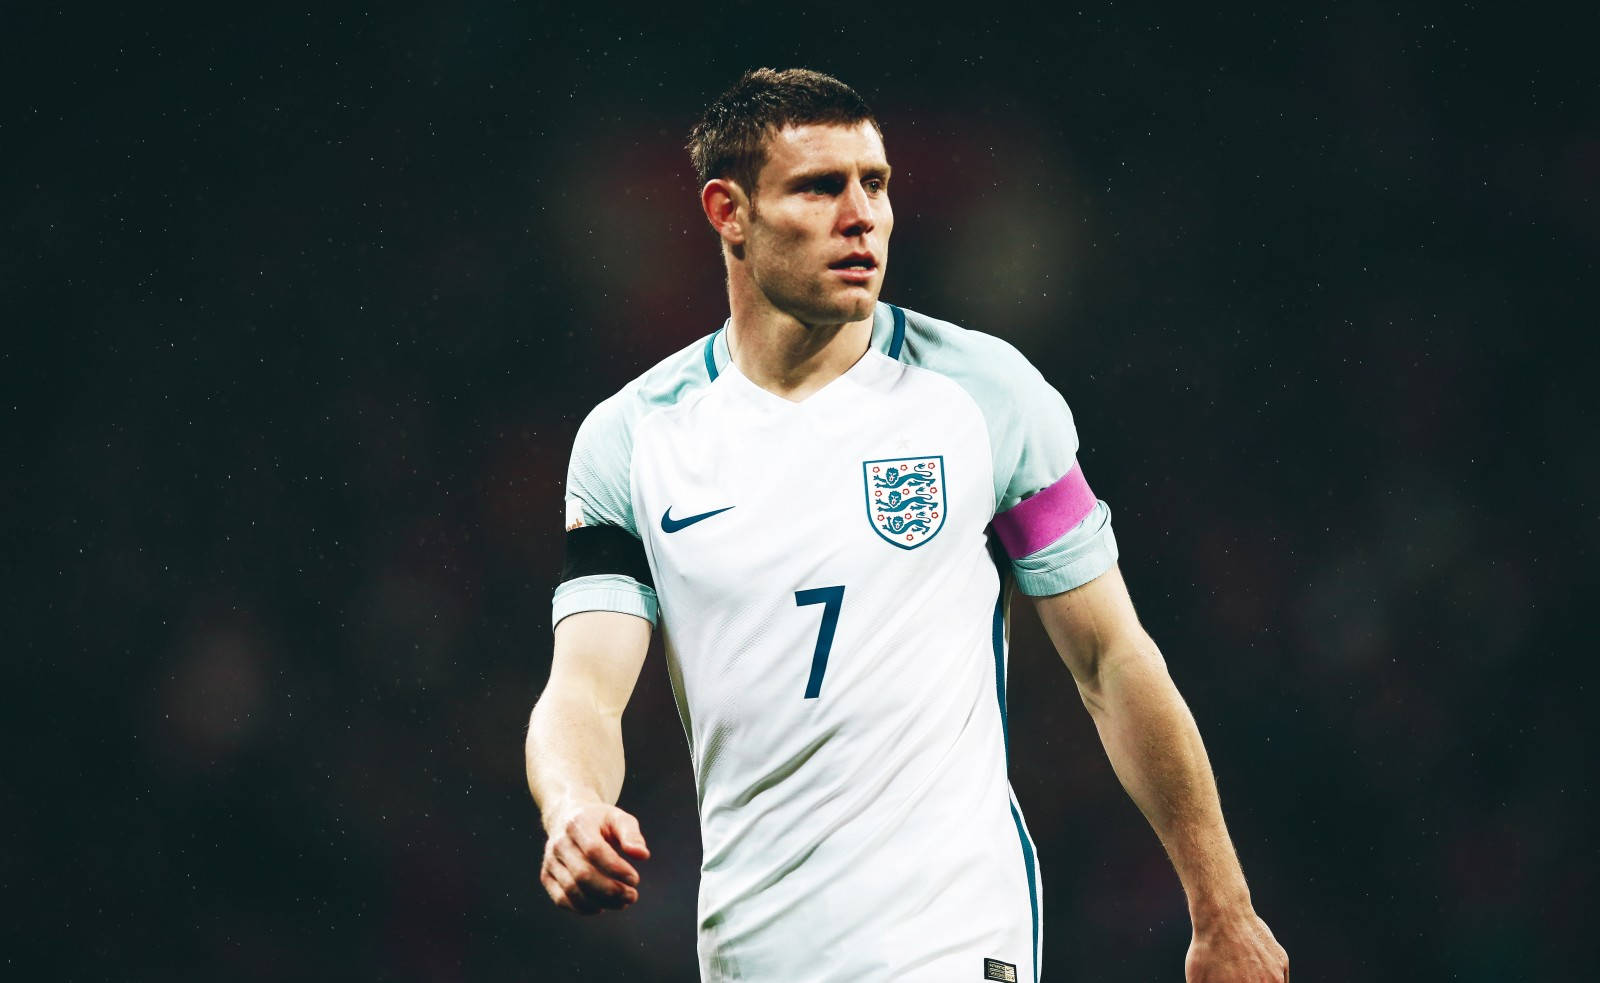 Jamesmilner Spelar För England. (this Would Be A Possible Phrase To Put On A Computer Or Mobile Wallpaper Featuring James Milner.) Wallpaper